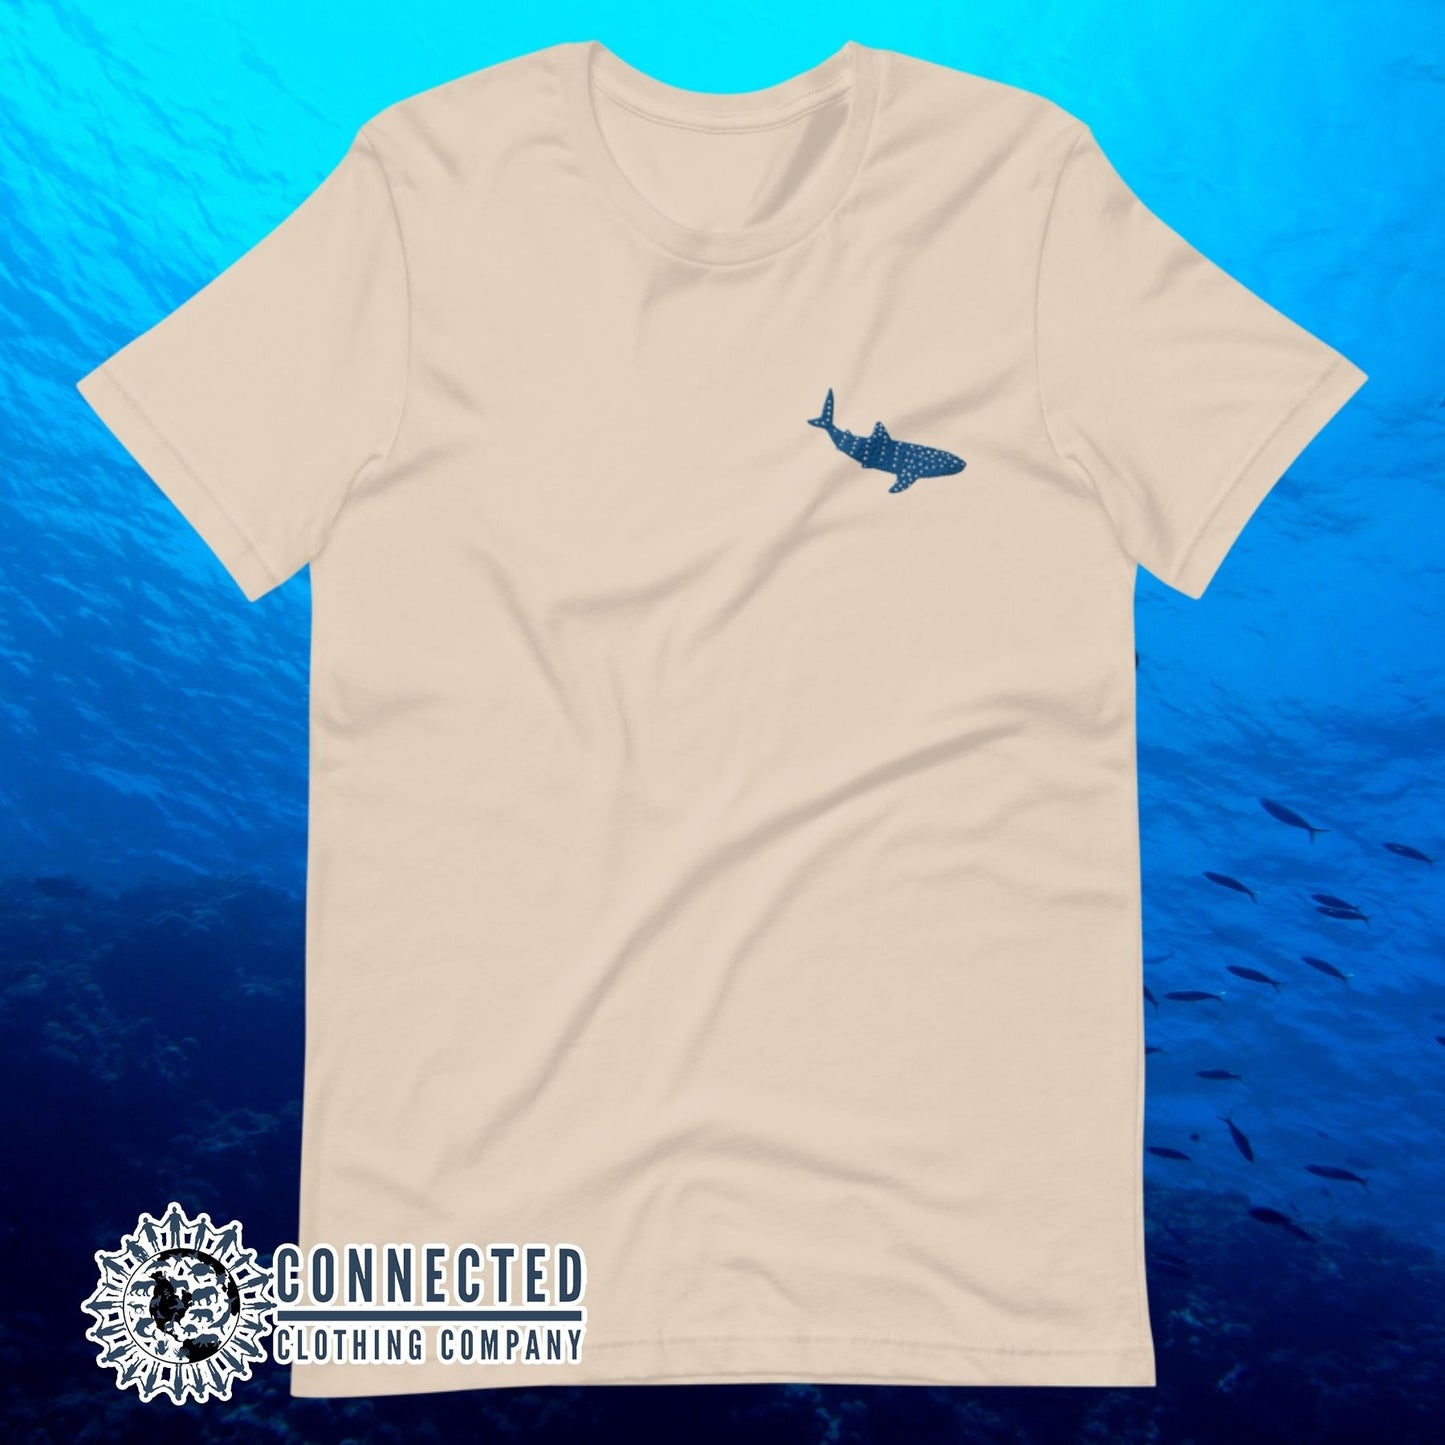 Soft Cream Embroidered Whale Shark Short-Sleeve Shirt - sweetsherriloudesigns - Ethically and Sustainably Made - 10% of profits donated to shark conservation and ocean conservation